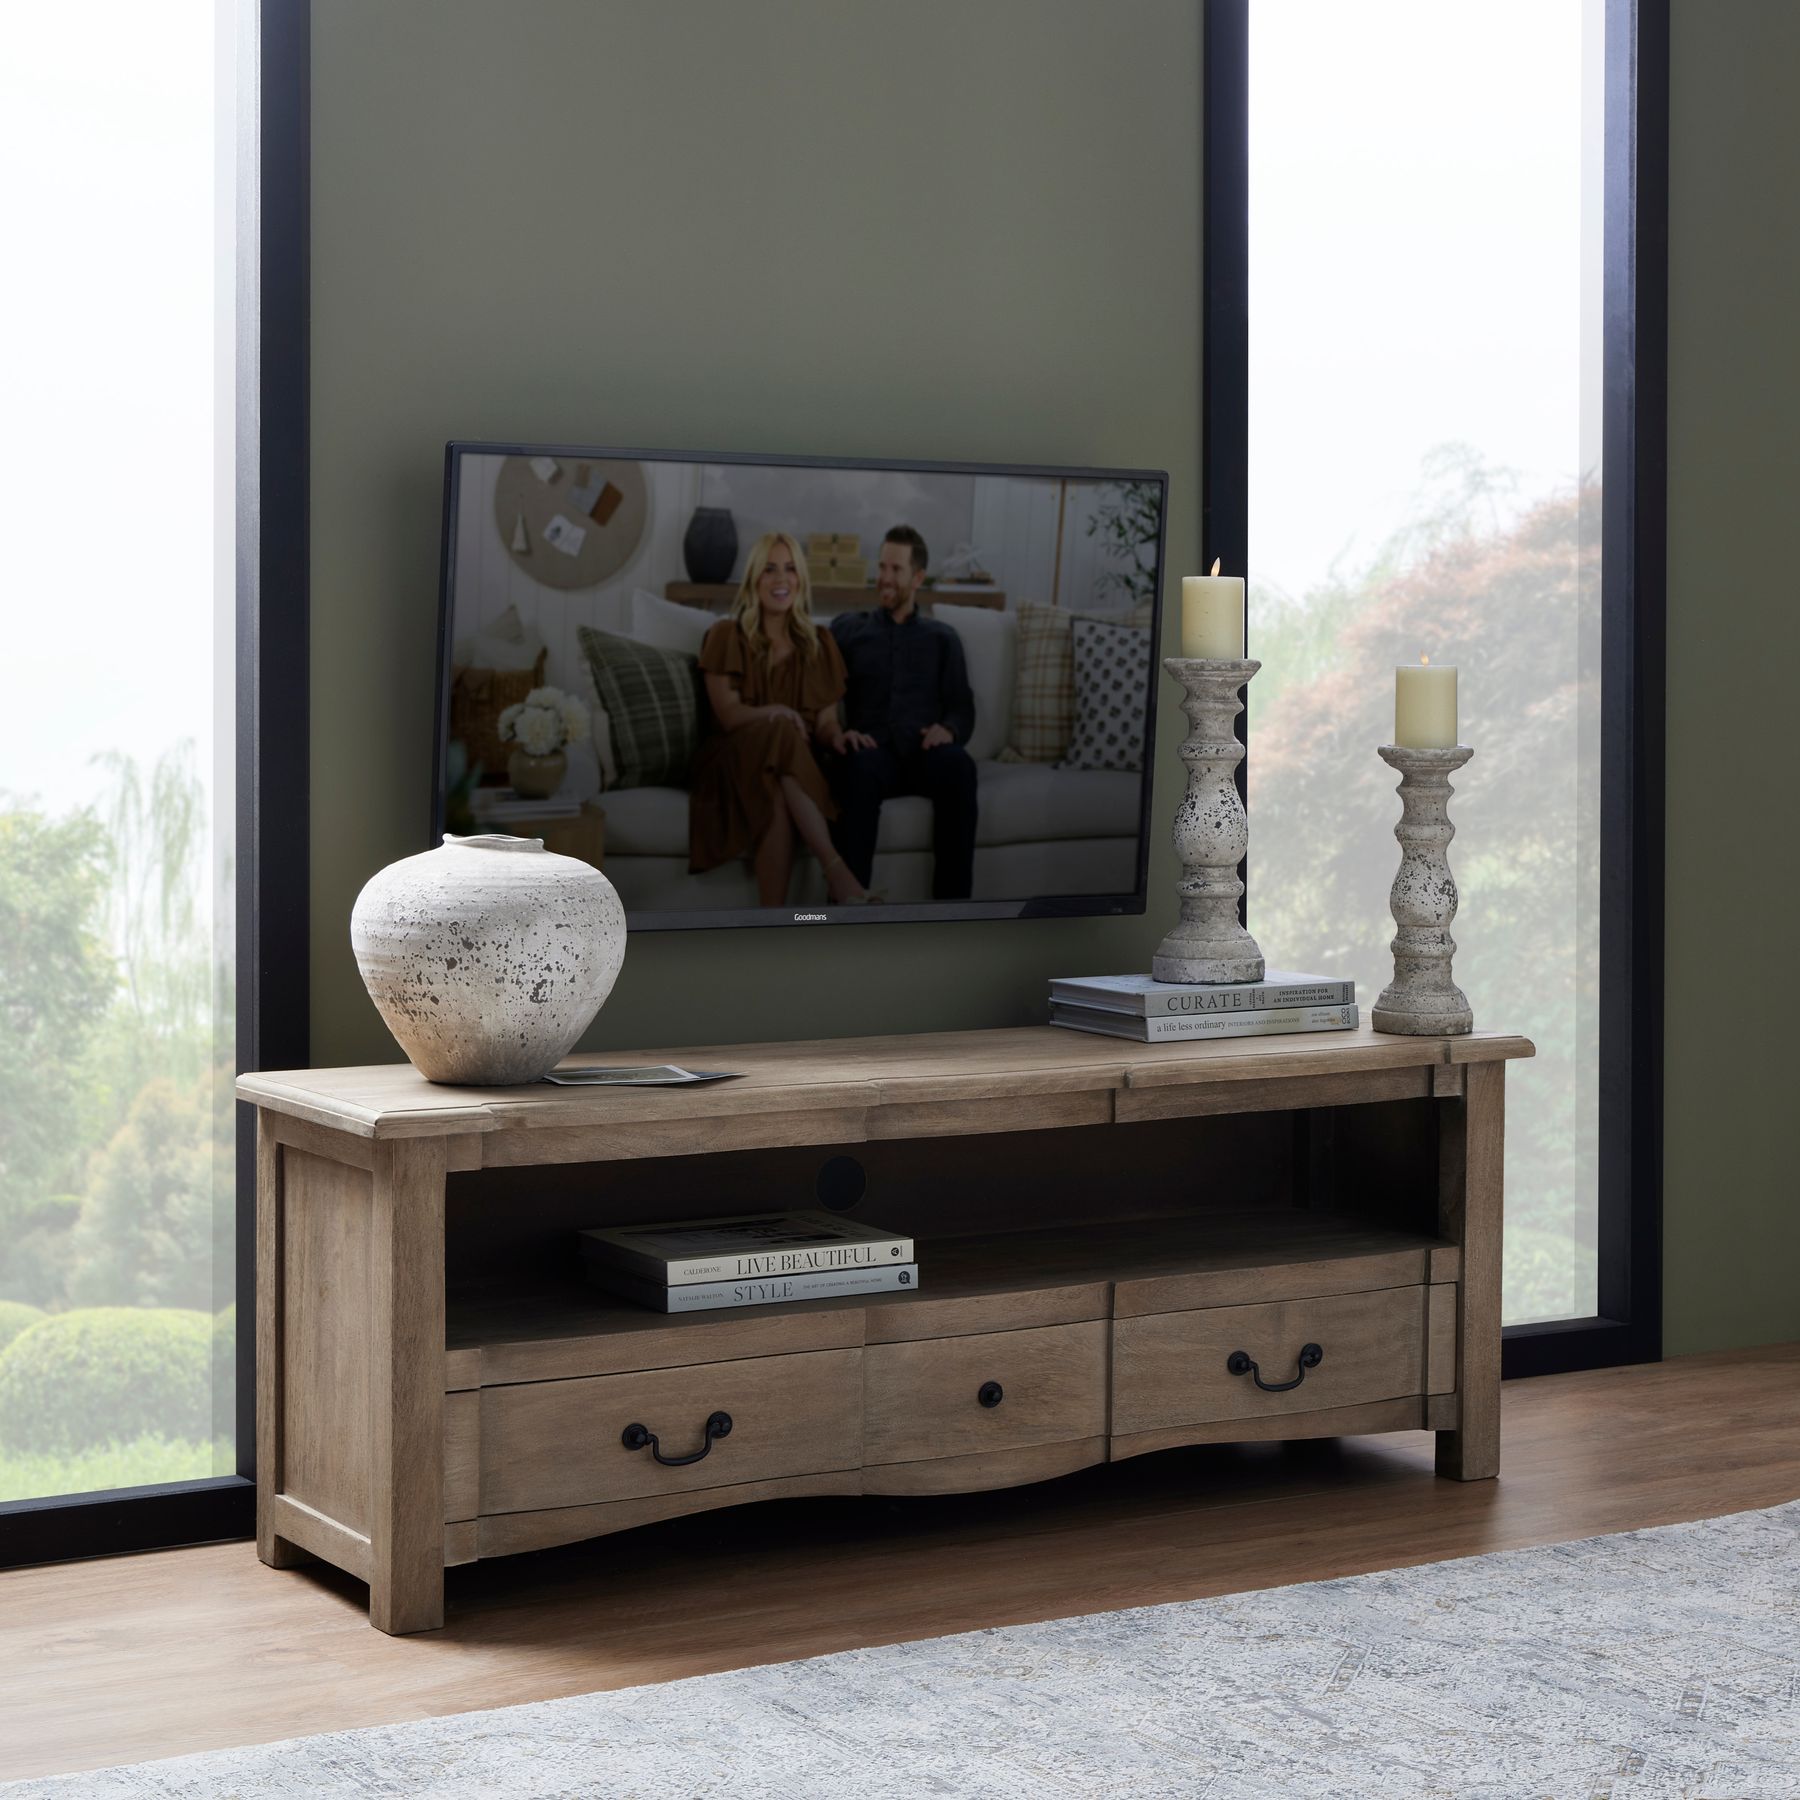 Copgrove Collection 1 Drawer Media Unit - Image 5